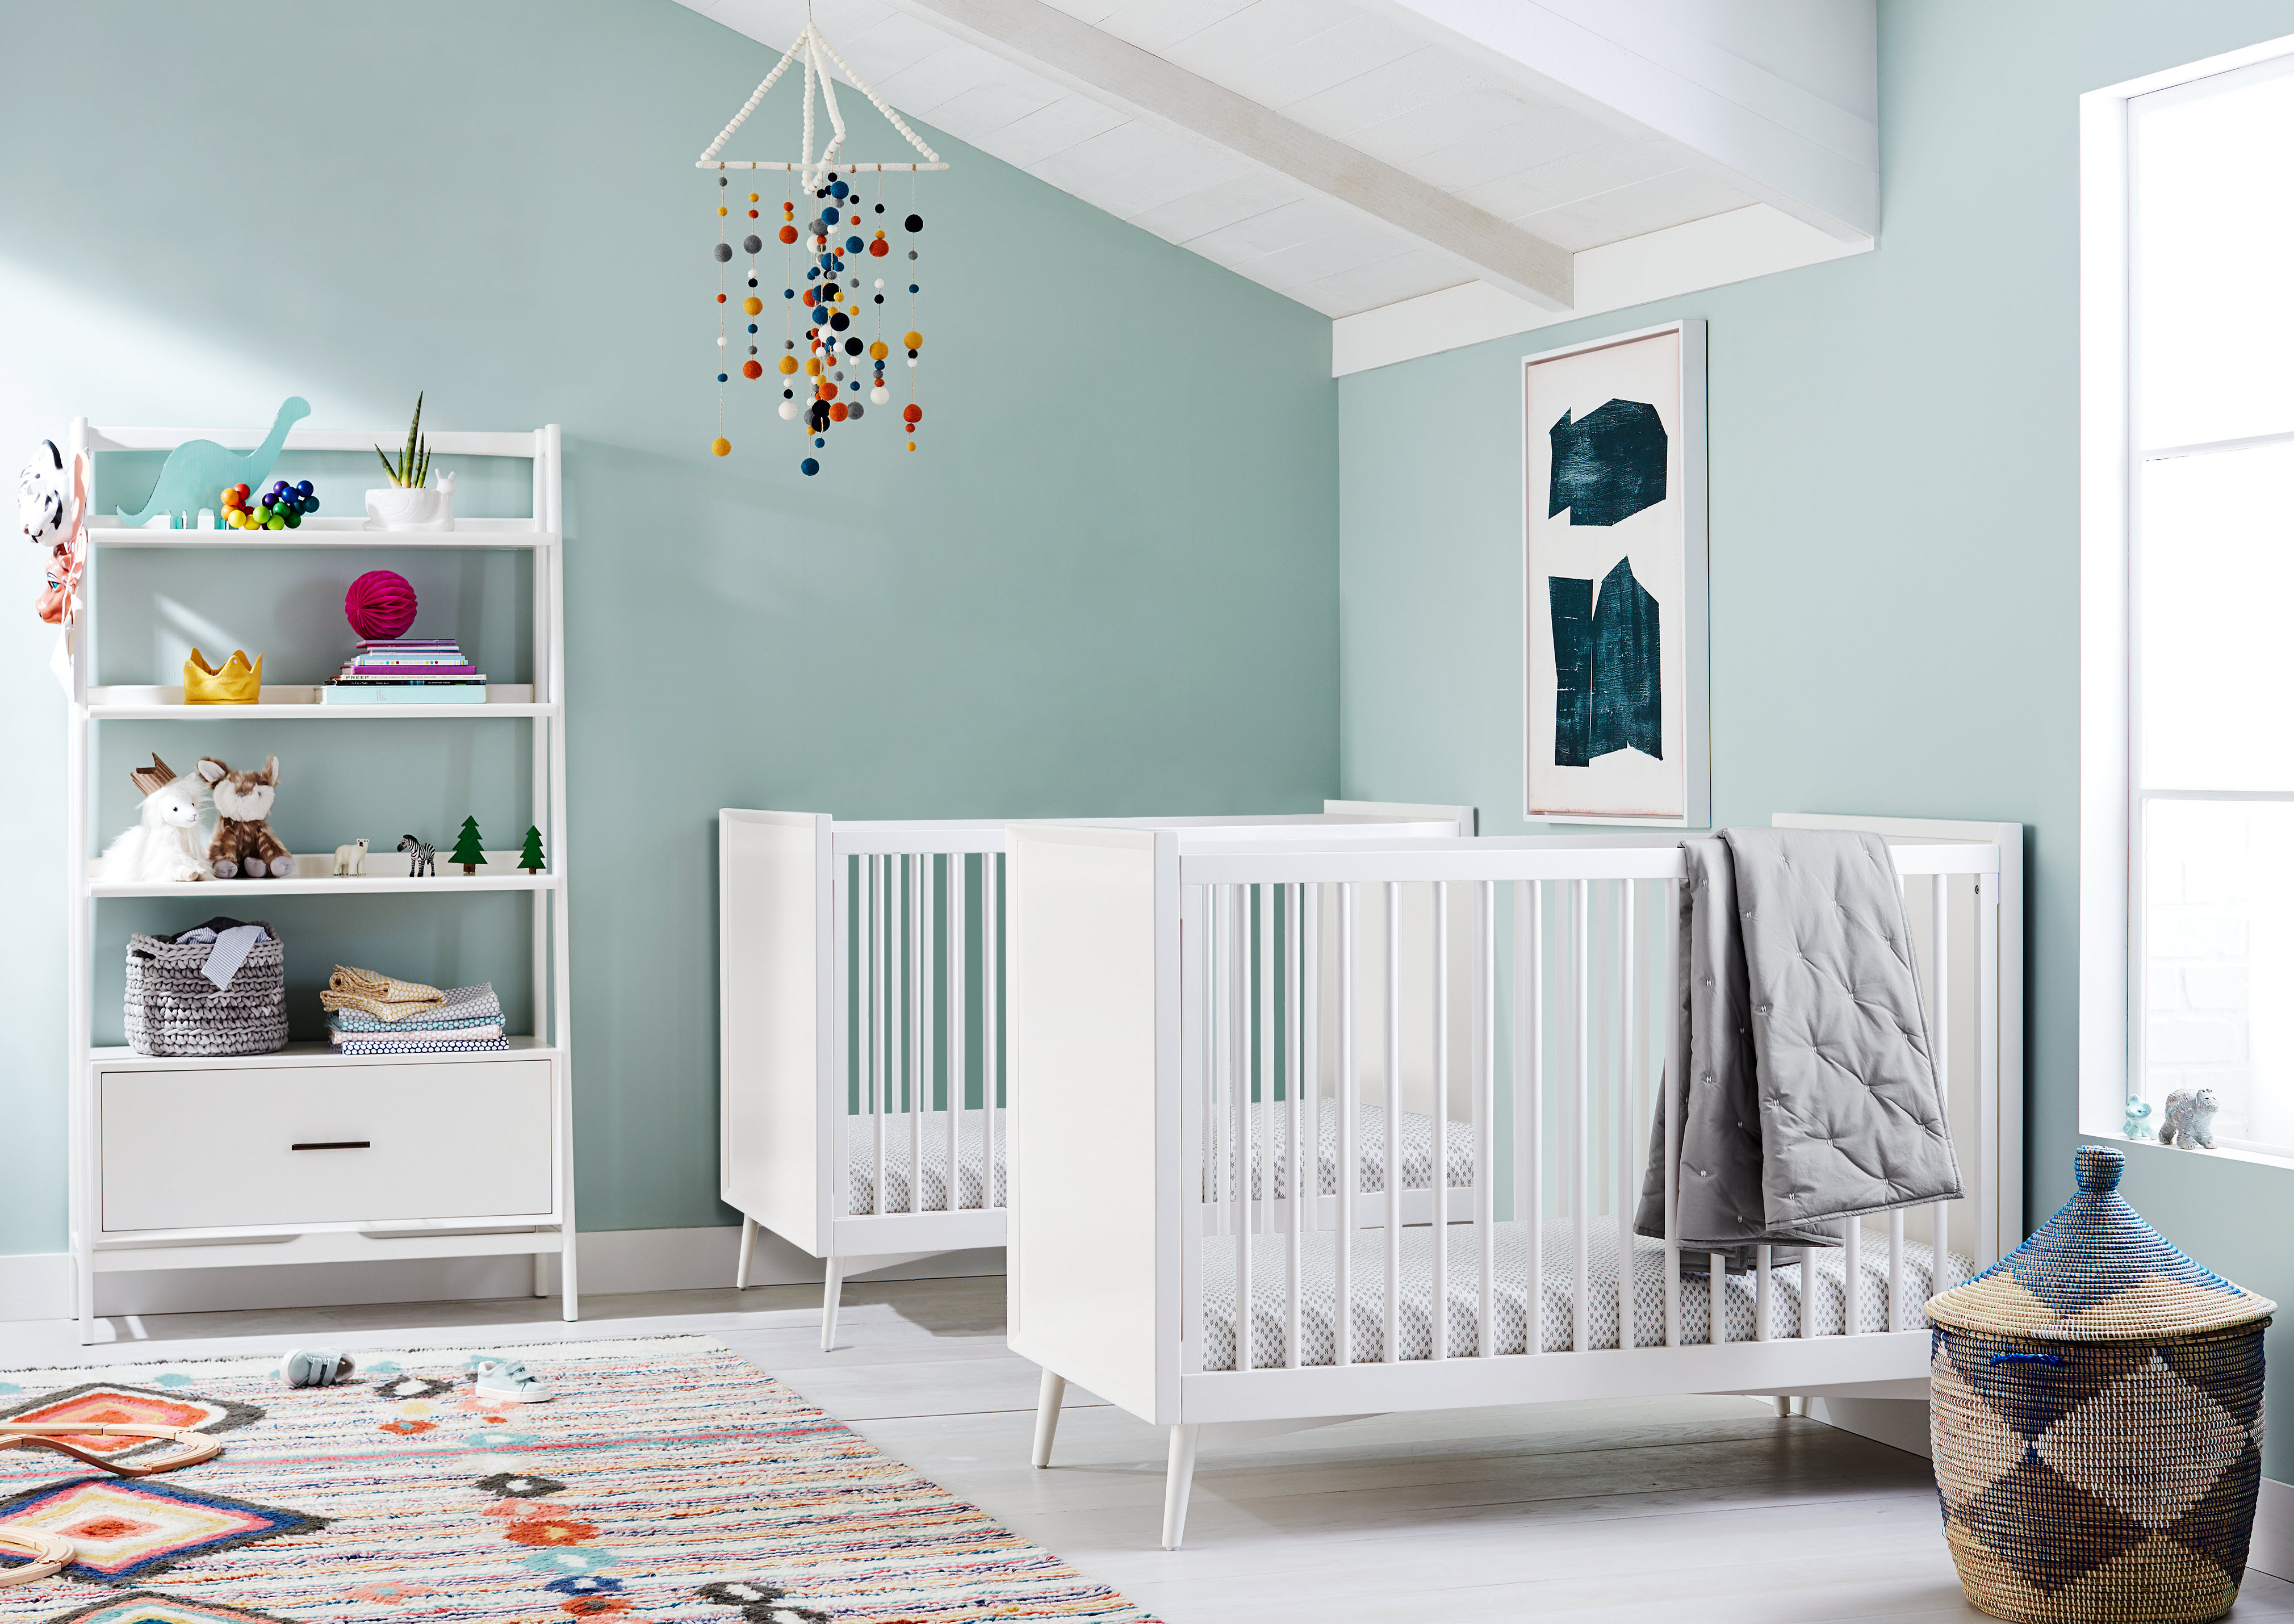 This West Elm x Pottery Barn Kids Collection Is Nursery Perfection